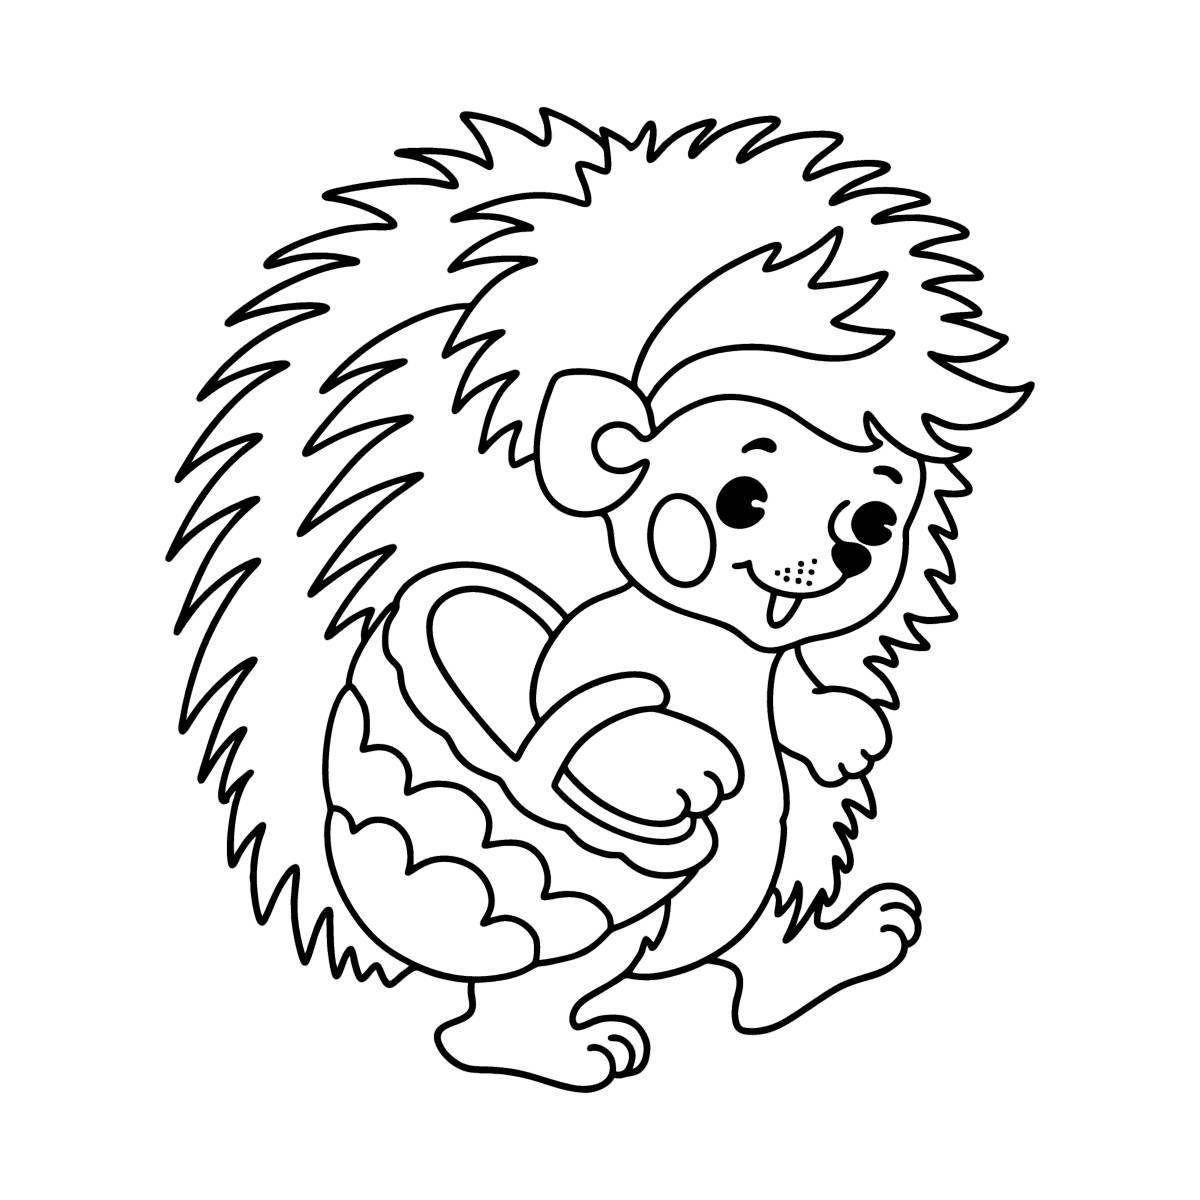 Charming hedgehog and bear coloring book